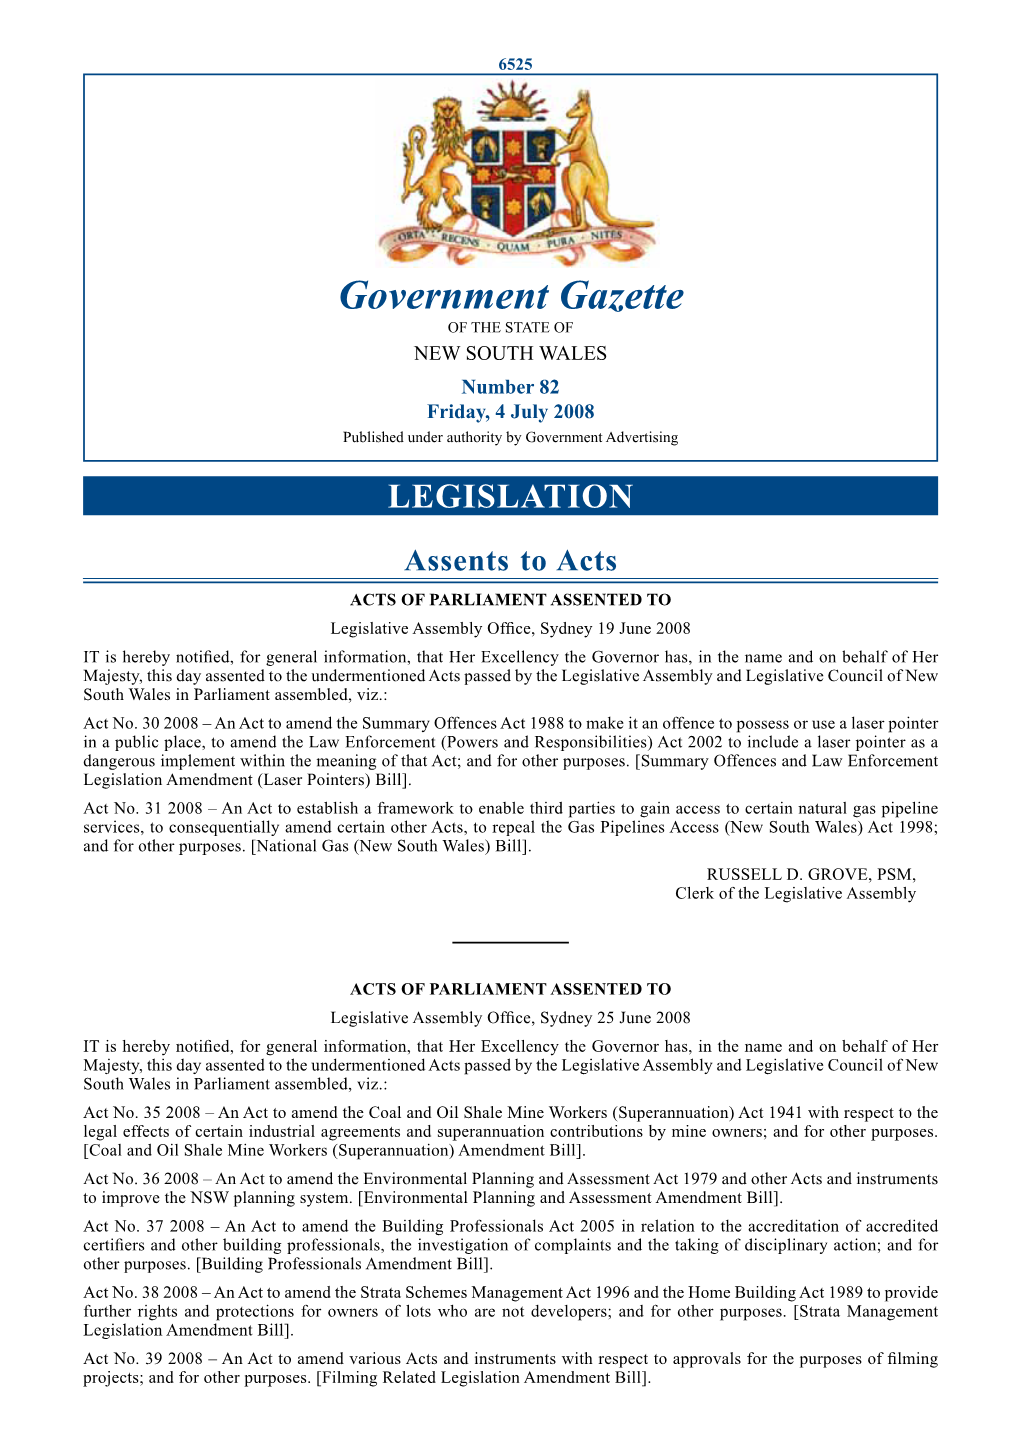 Government Gazette of the STATE of NEW SOUTH WALES Number 82 Friday, 4 July 2008 Published Under Authority by Government Advertising